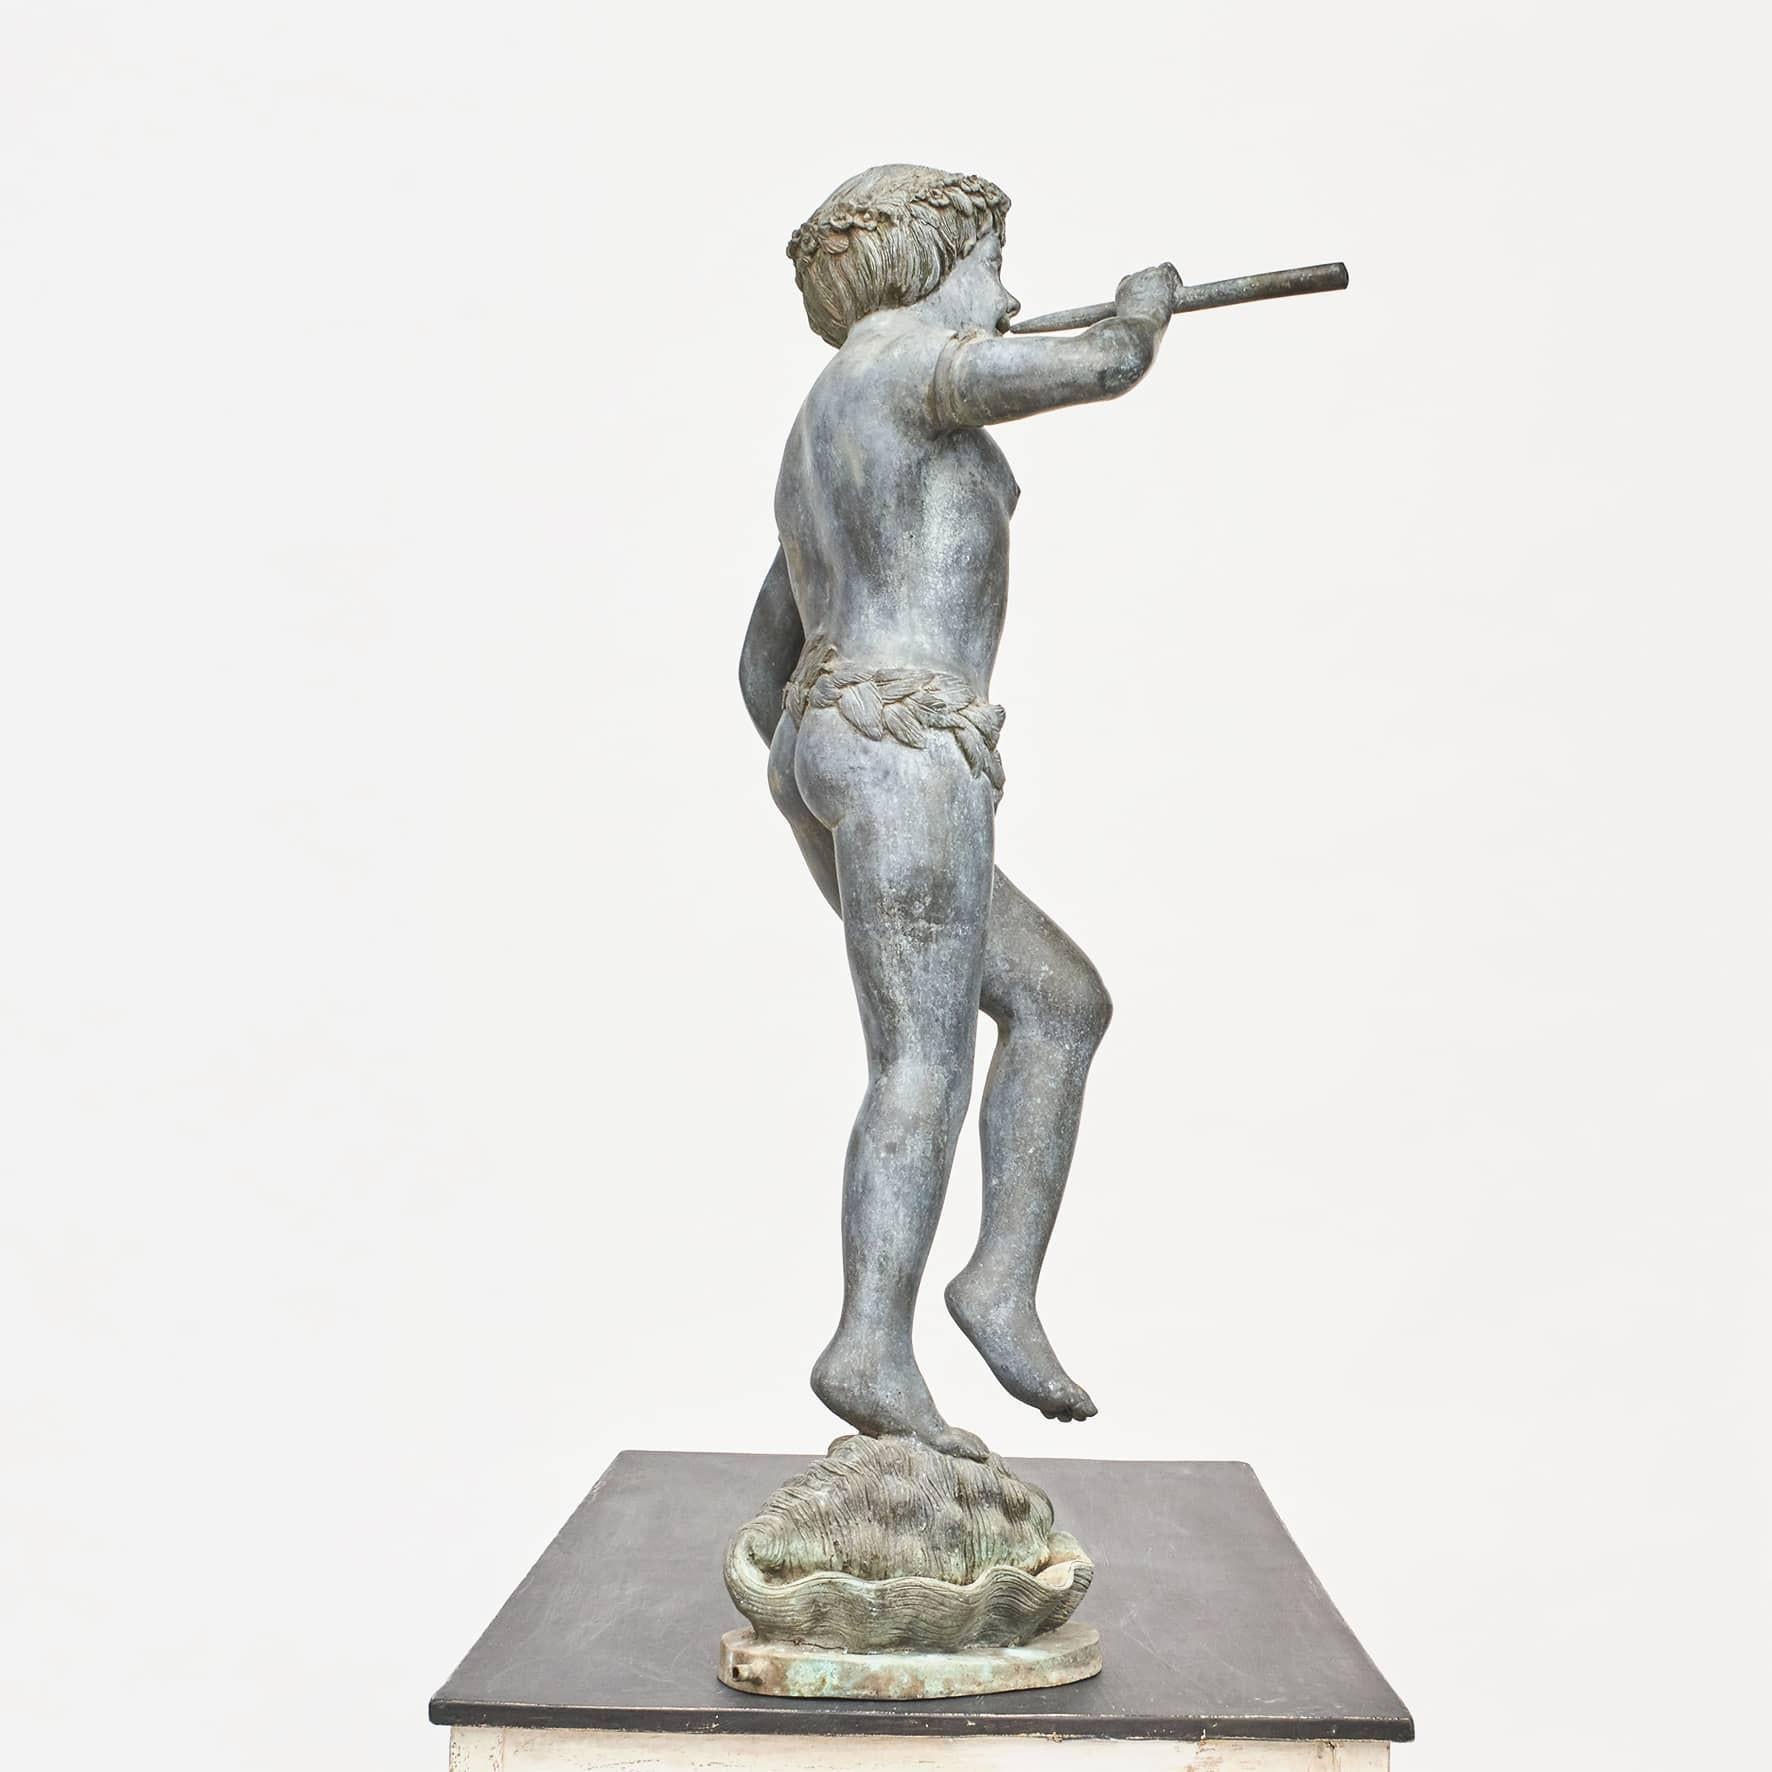 French patinated bronze garden fountain with figural boy playing flute while standing on a sea shell.
The water springs from the flute.
Nice patina.
French School, France 19th century.